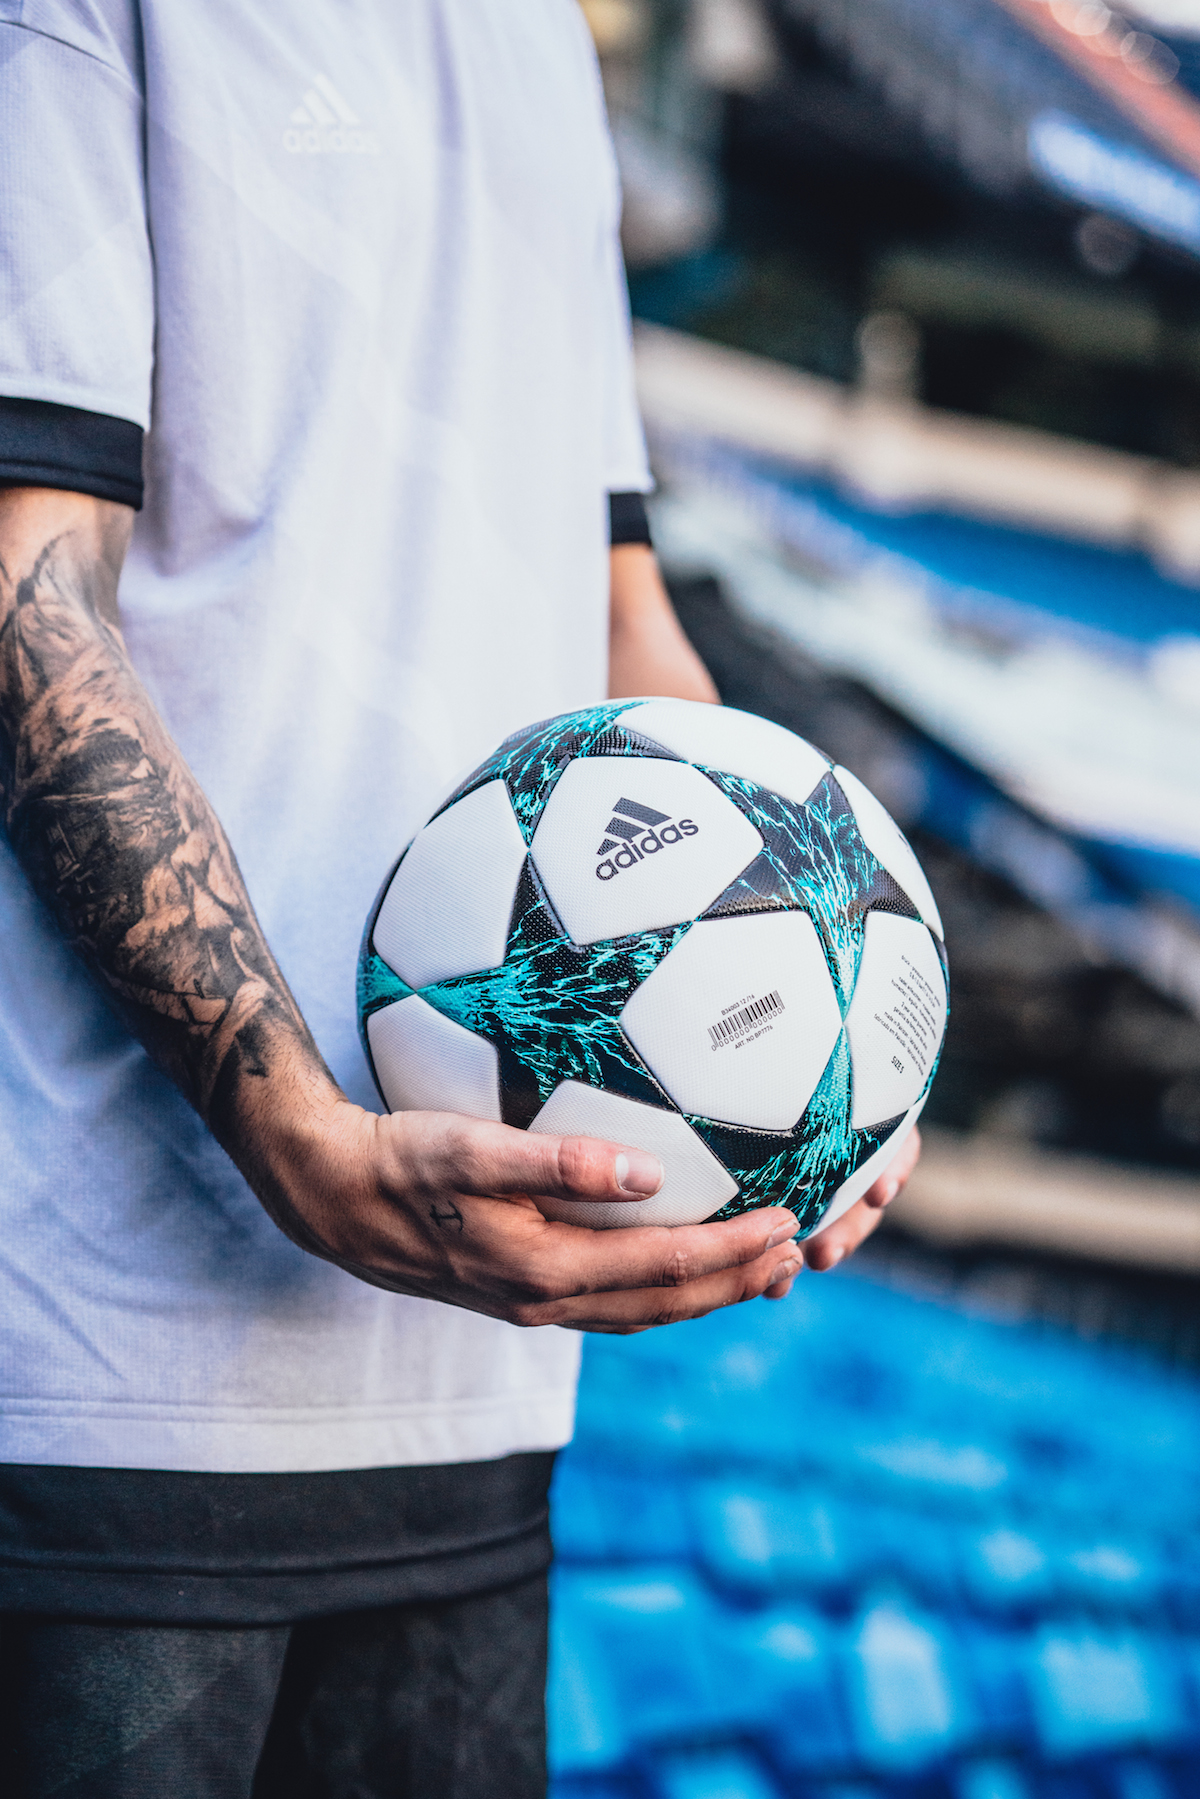  adidas UEFA Champions League 23/24 Pro Match Ball - Inspired  by the Anthem, FIFA Quality Pro Certified, High-Grade Butyl Bladder (Size  5) : Sports & Outdoors